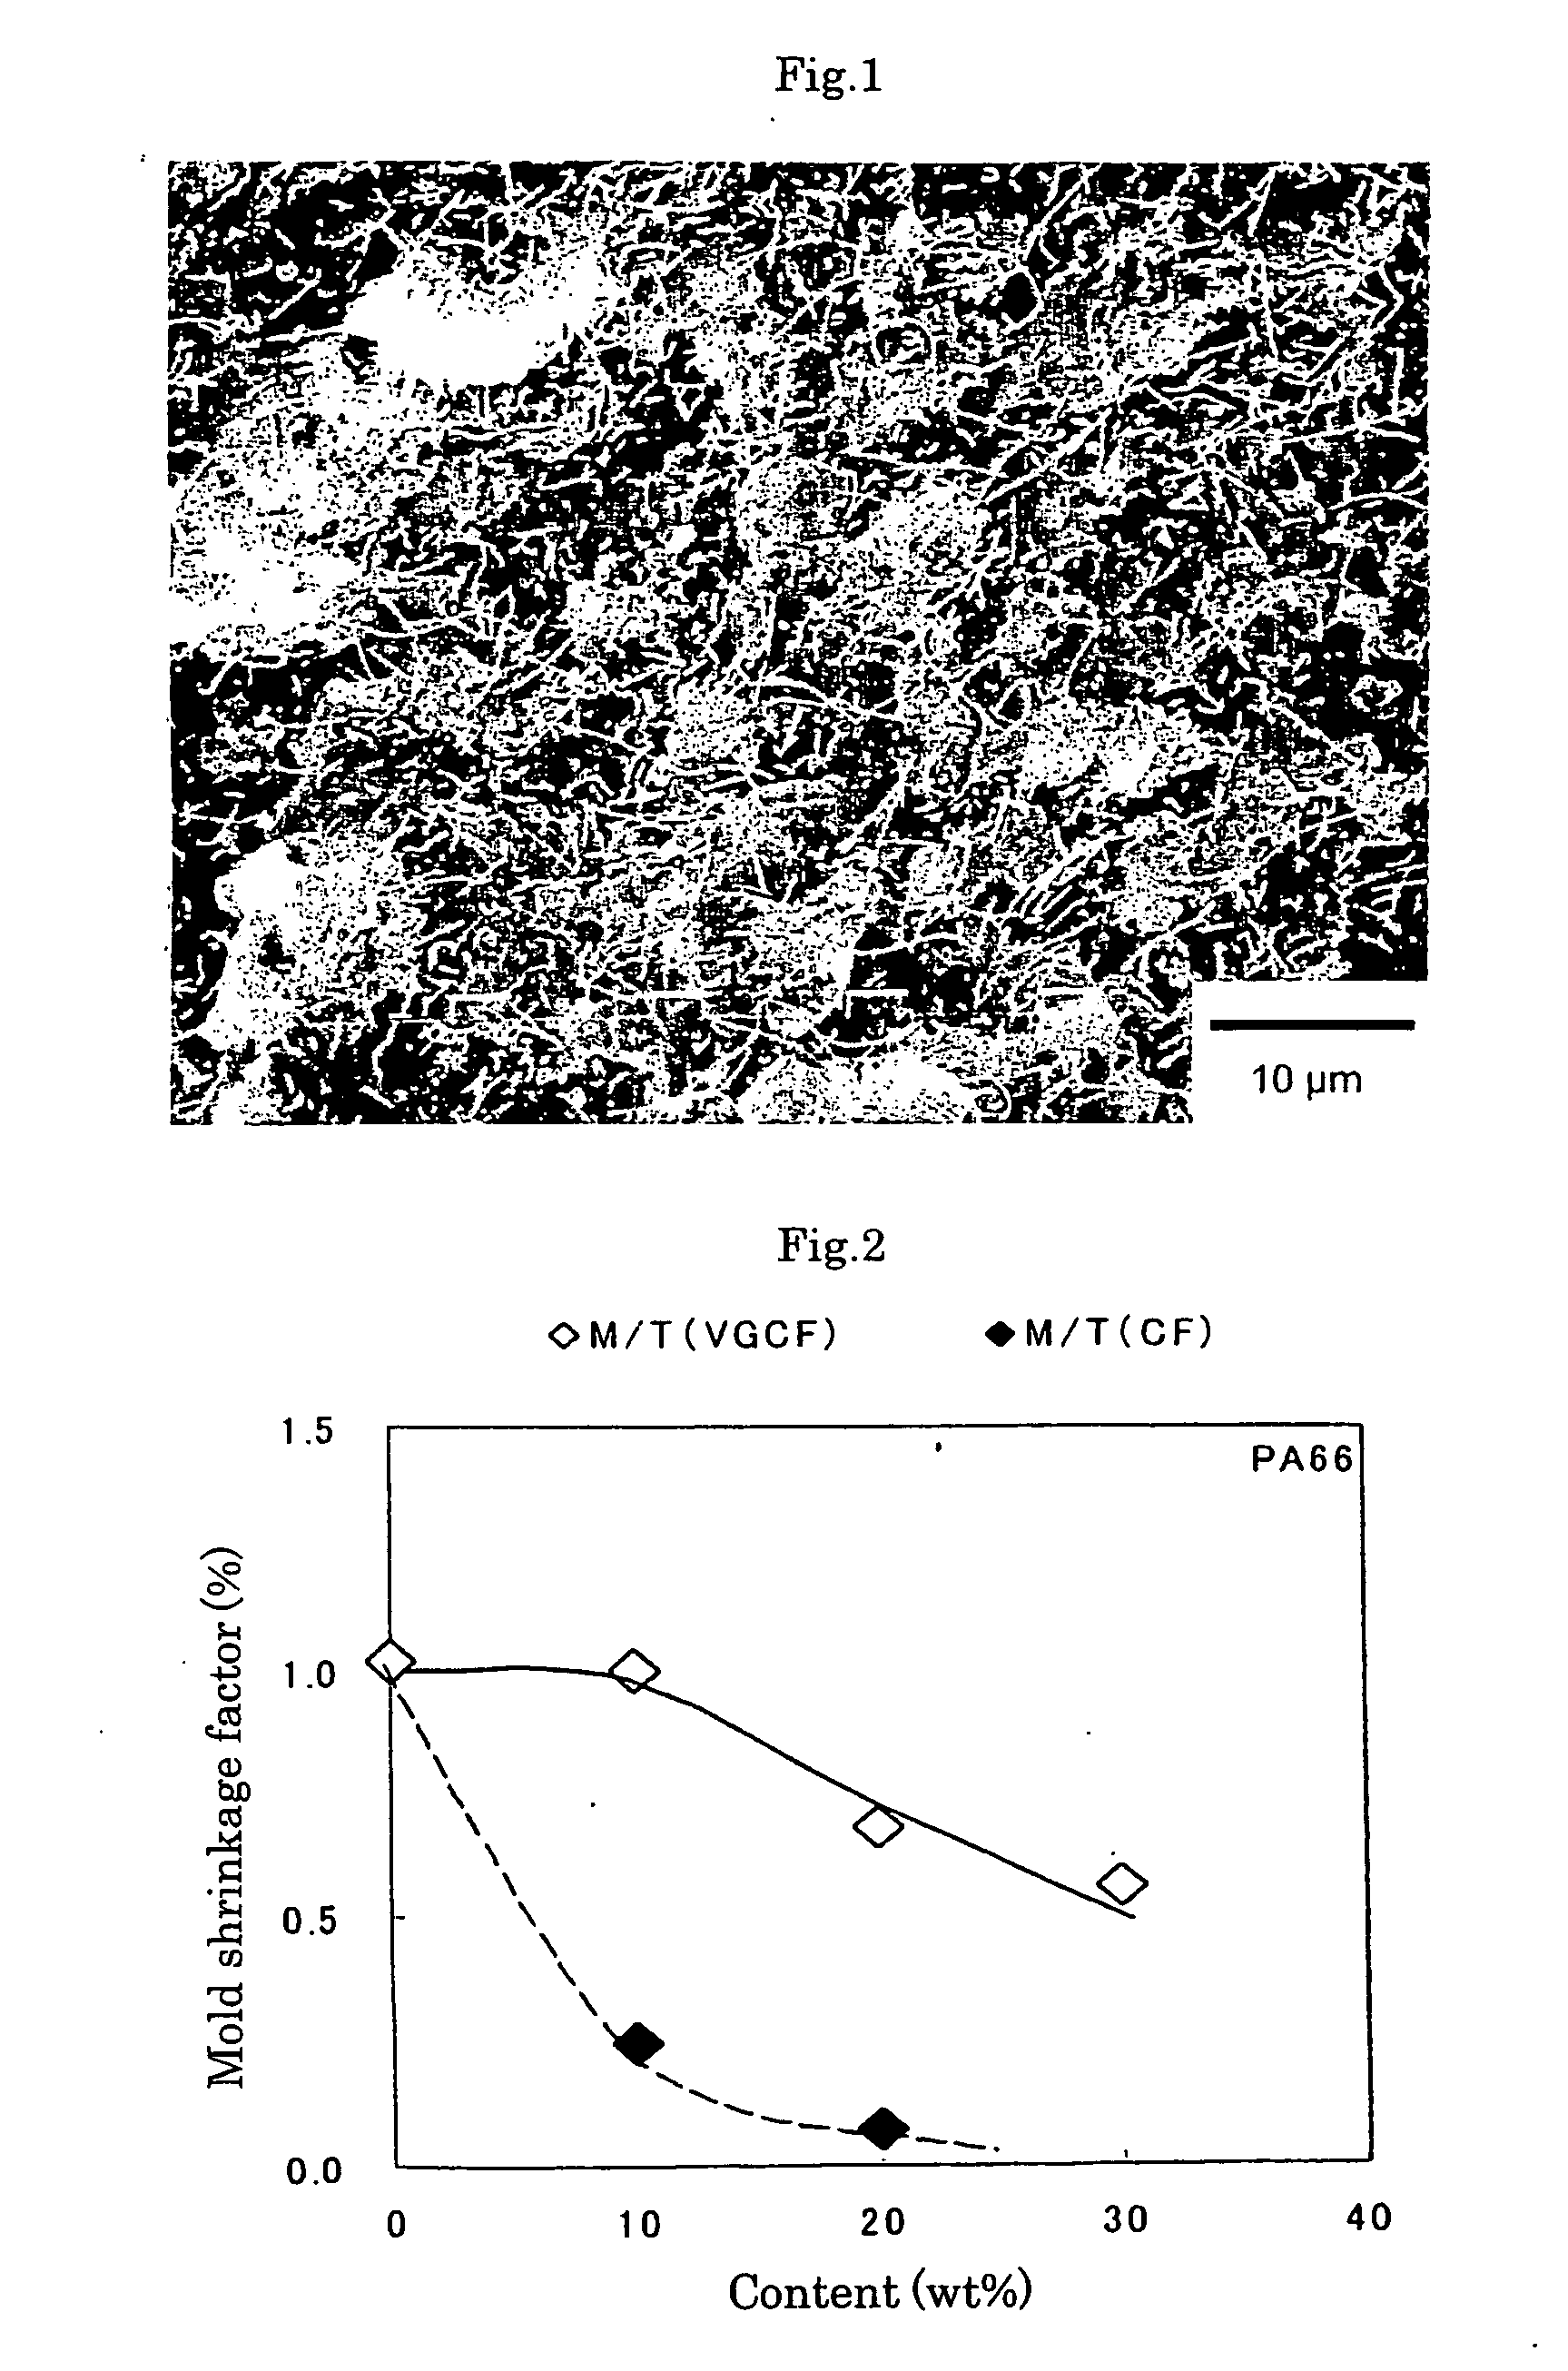 Carbon-based electrically conducting filler, composition and use thereof